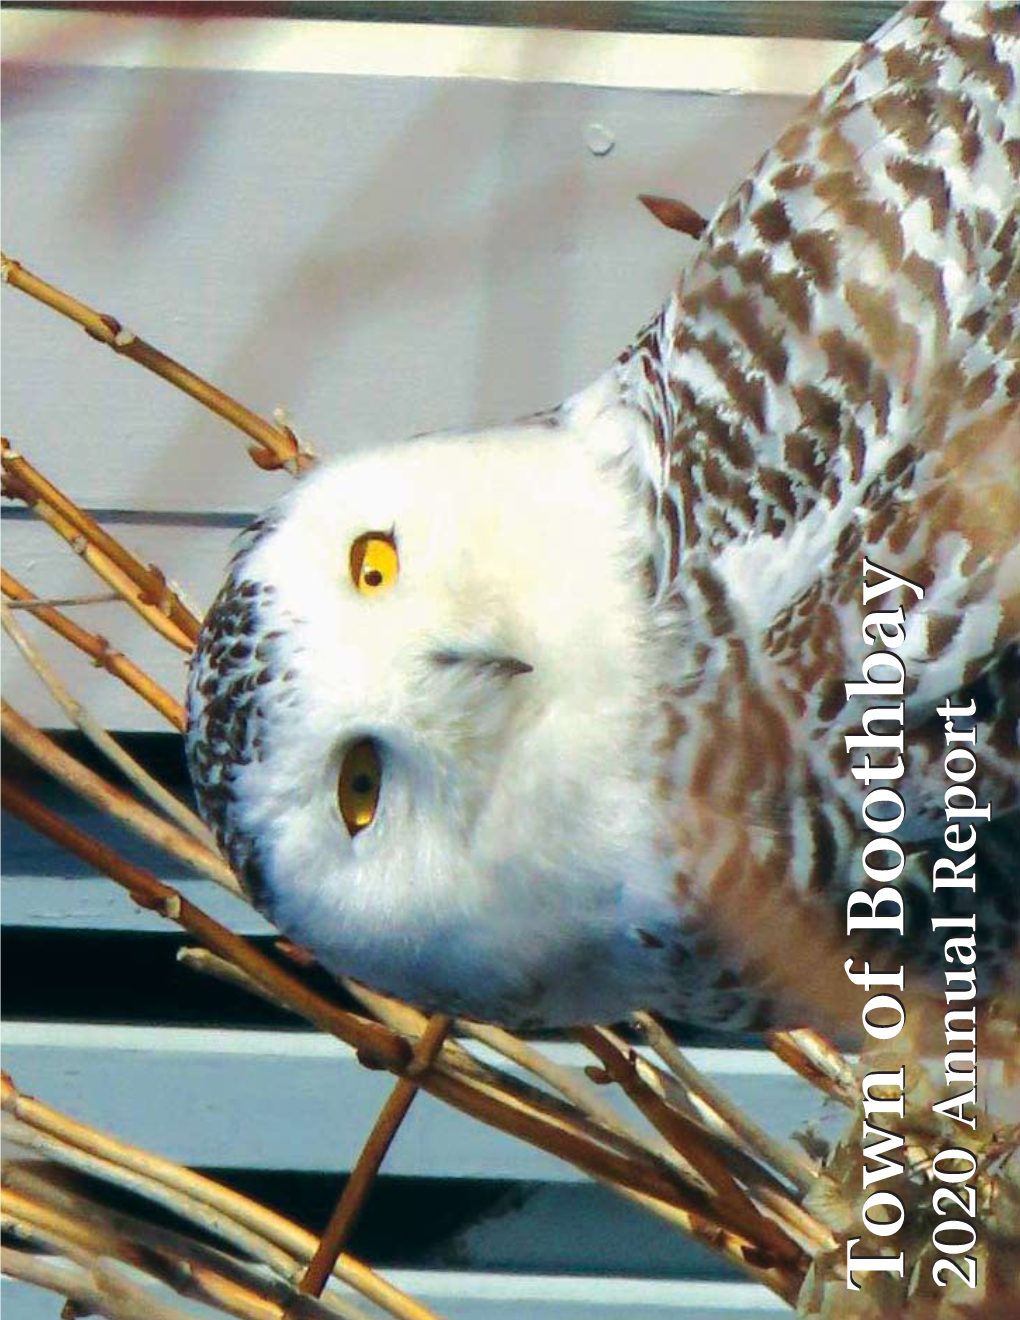 Annual Reportreport the Snowy Owls That Visited Ocean Point This Year Were a Sign of Hope for a Lot of Us During the Pandemic